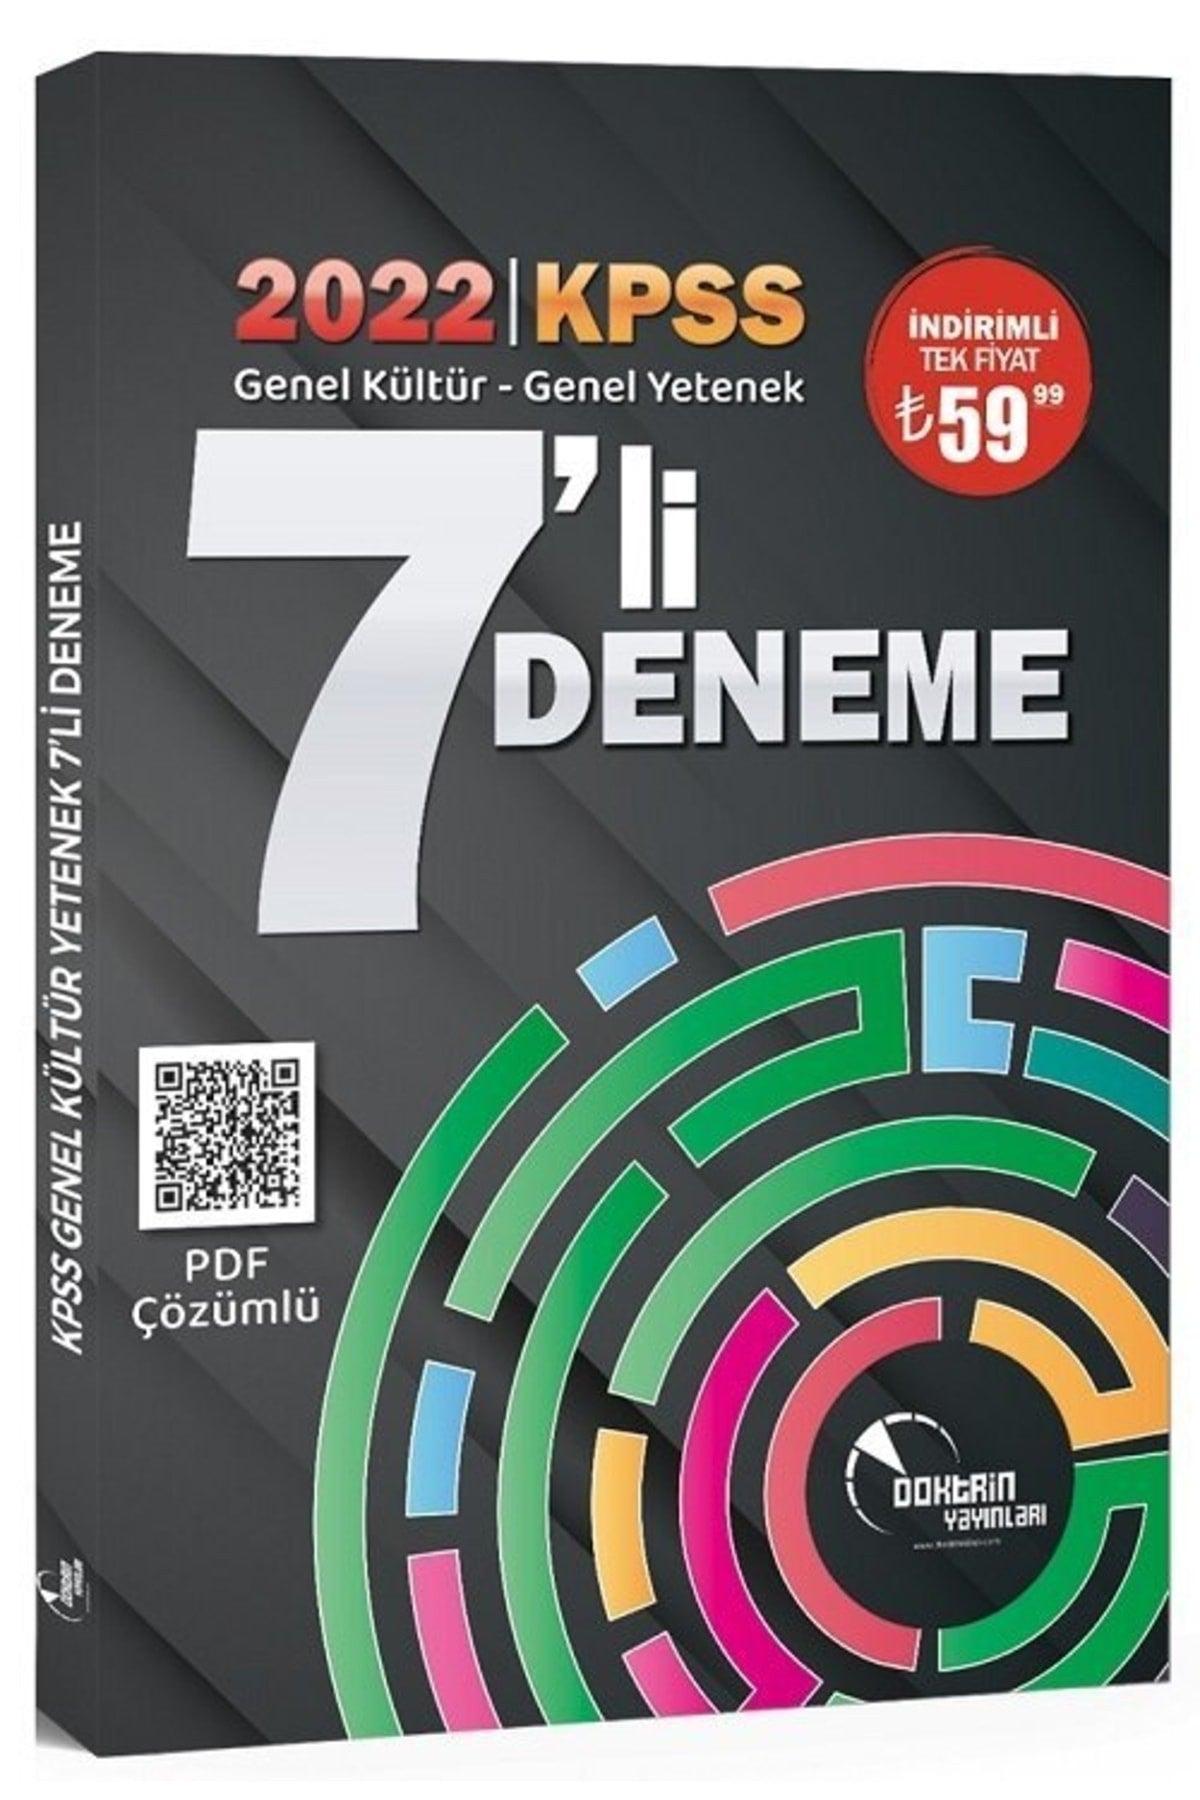 - Super Price Doctrine 2022 Kpss General Ability General Culture 7 Essays Pdf with Solution - Swordslife